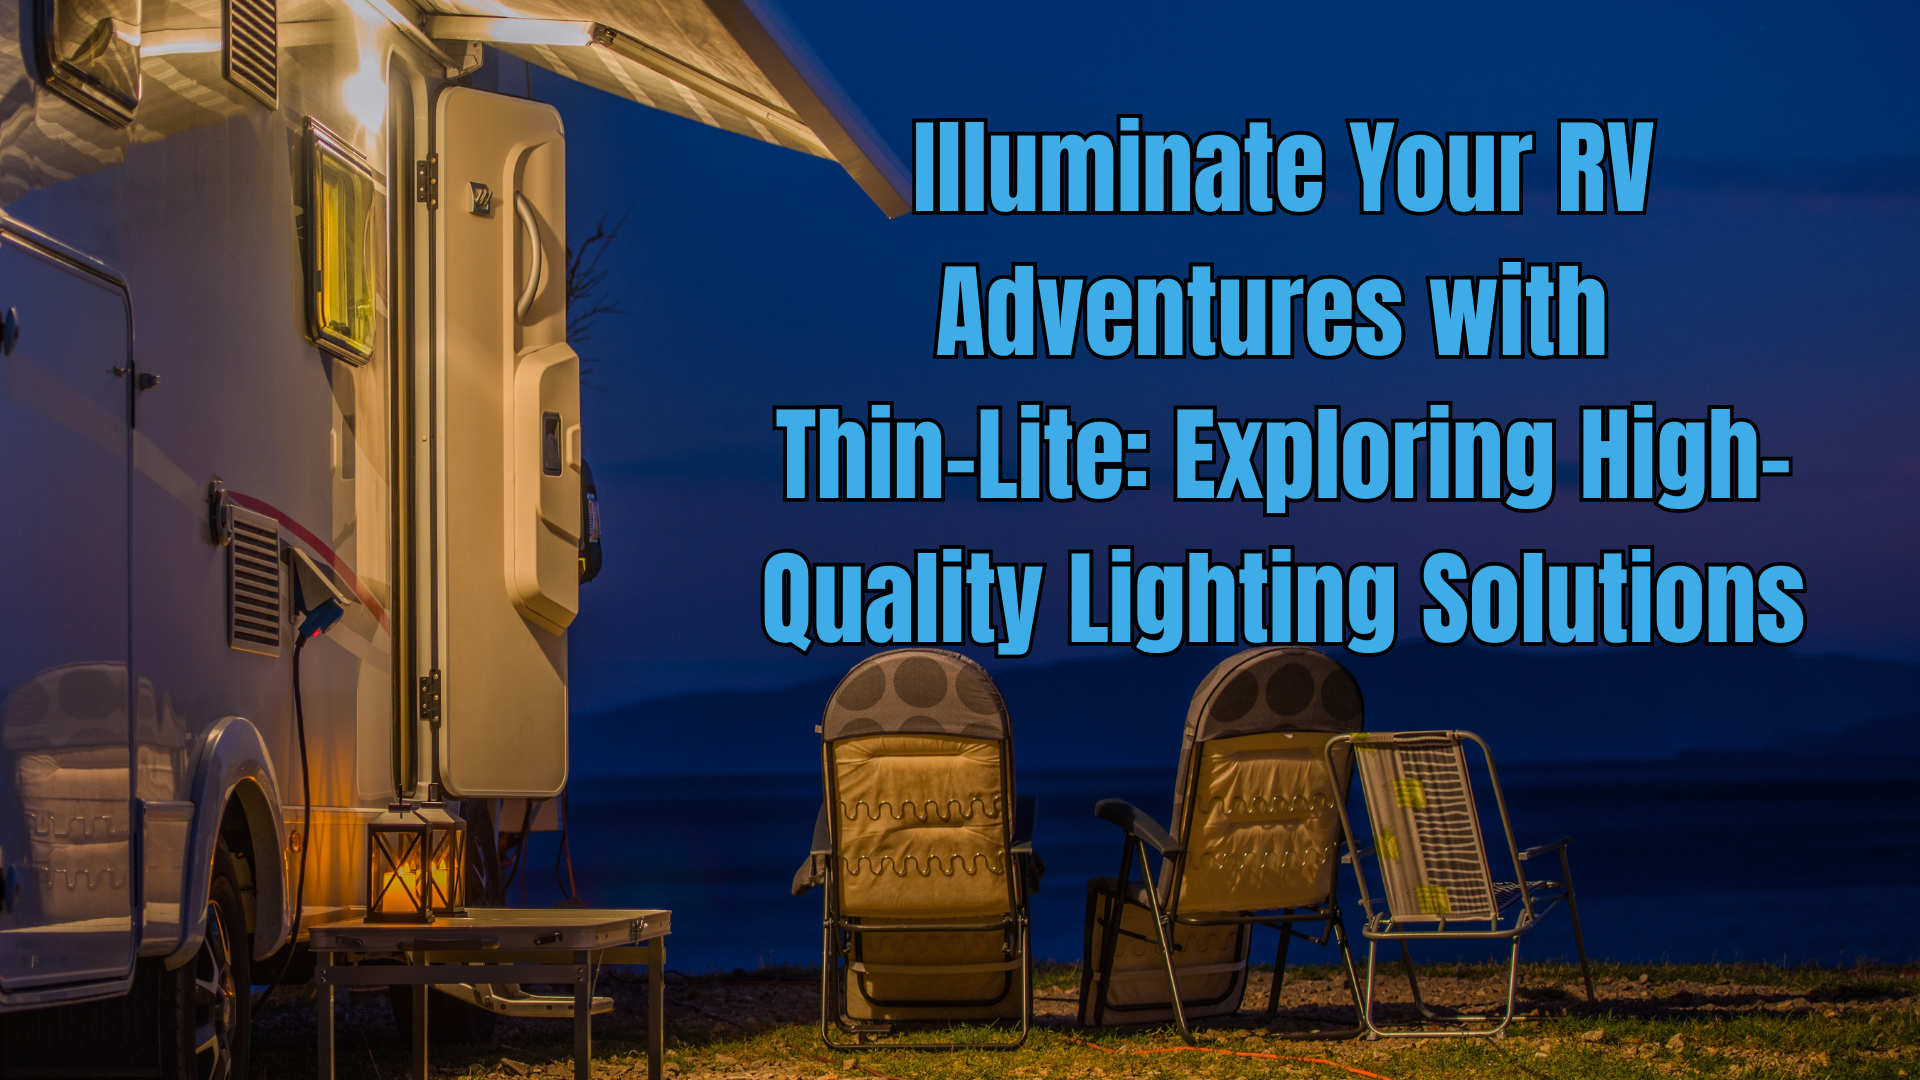 Illuminate Your RV Adventures with Thin-Lite: Exploring High-Quality Lighting Solutions